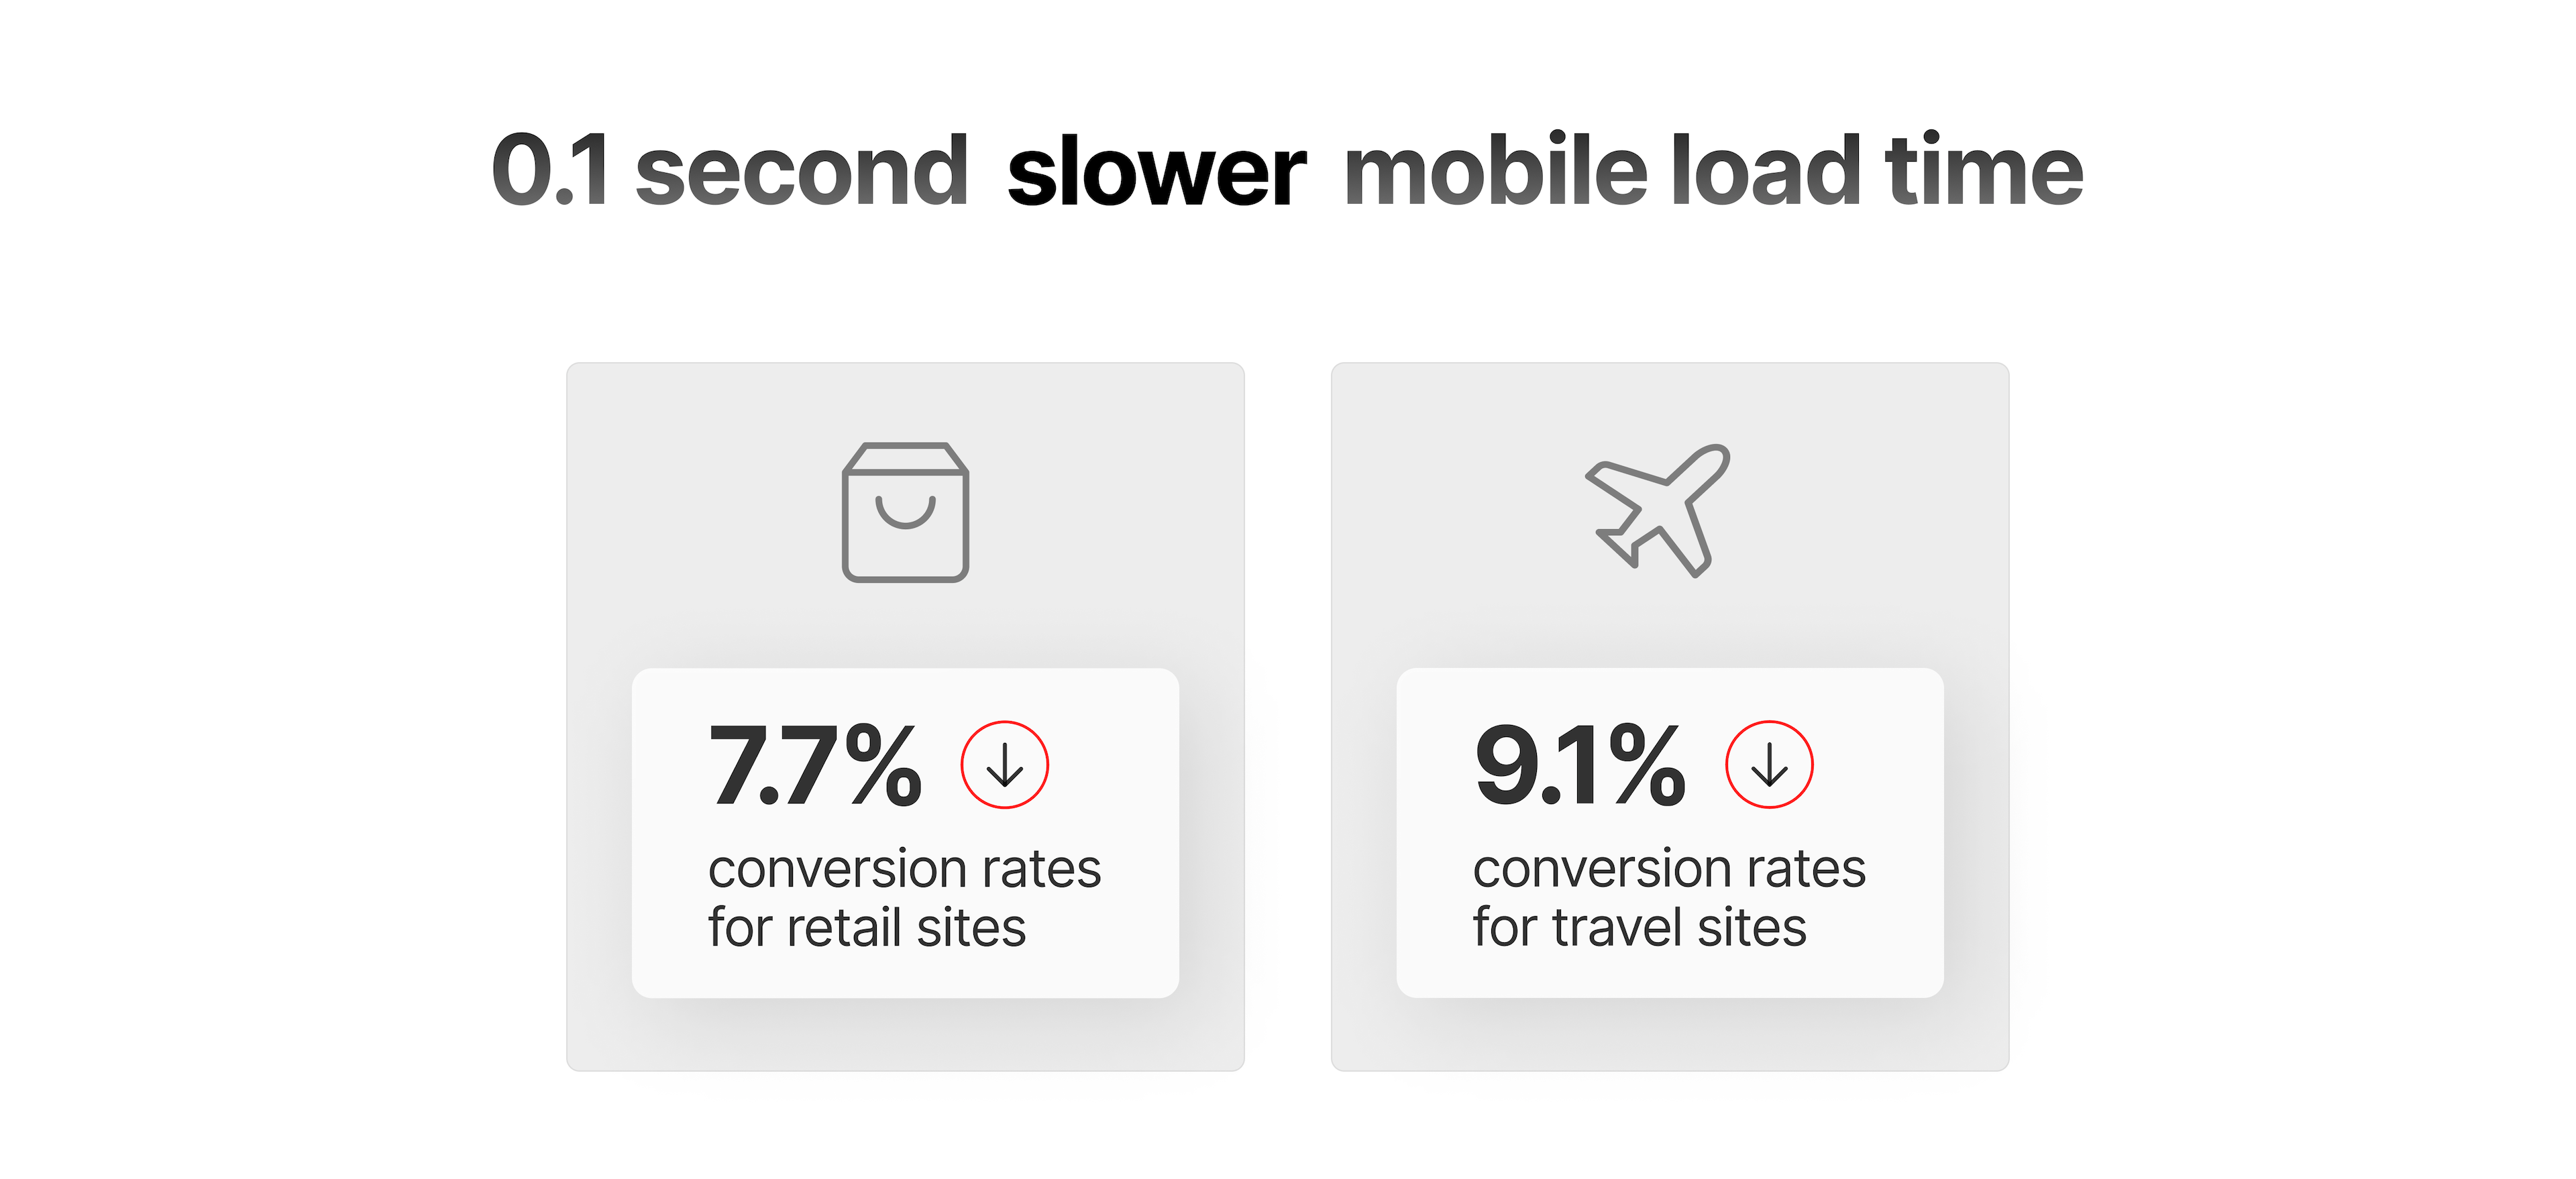 Slow load times have direct impact on user behavior.